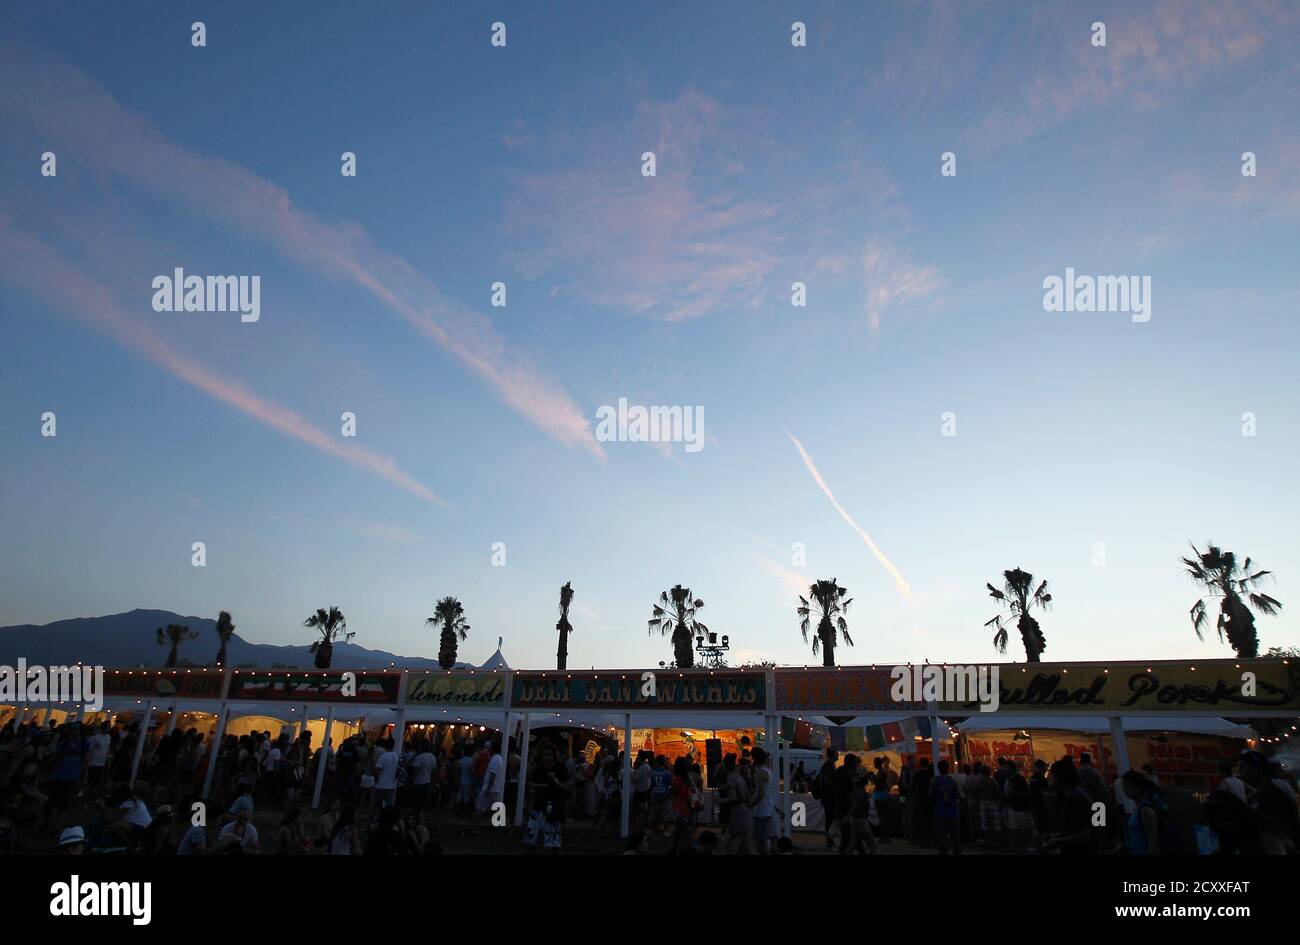 Concert-goers line up to order food from small food stands during the 2nd day of the Coachella Valley Music & Arts Festival in Indio, California April 16, 2011. REUTERS/Mike Blake (UNITED STATES - Tags: ENTERTAINMENT SOCIETY) Stock Photo